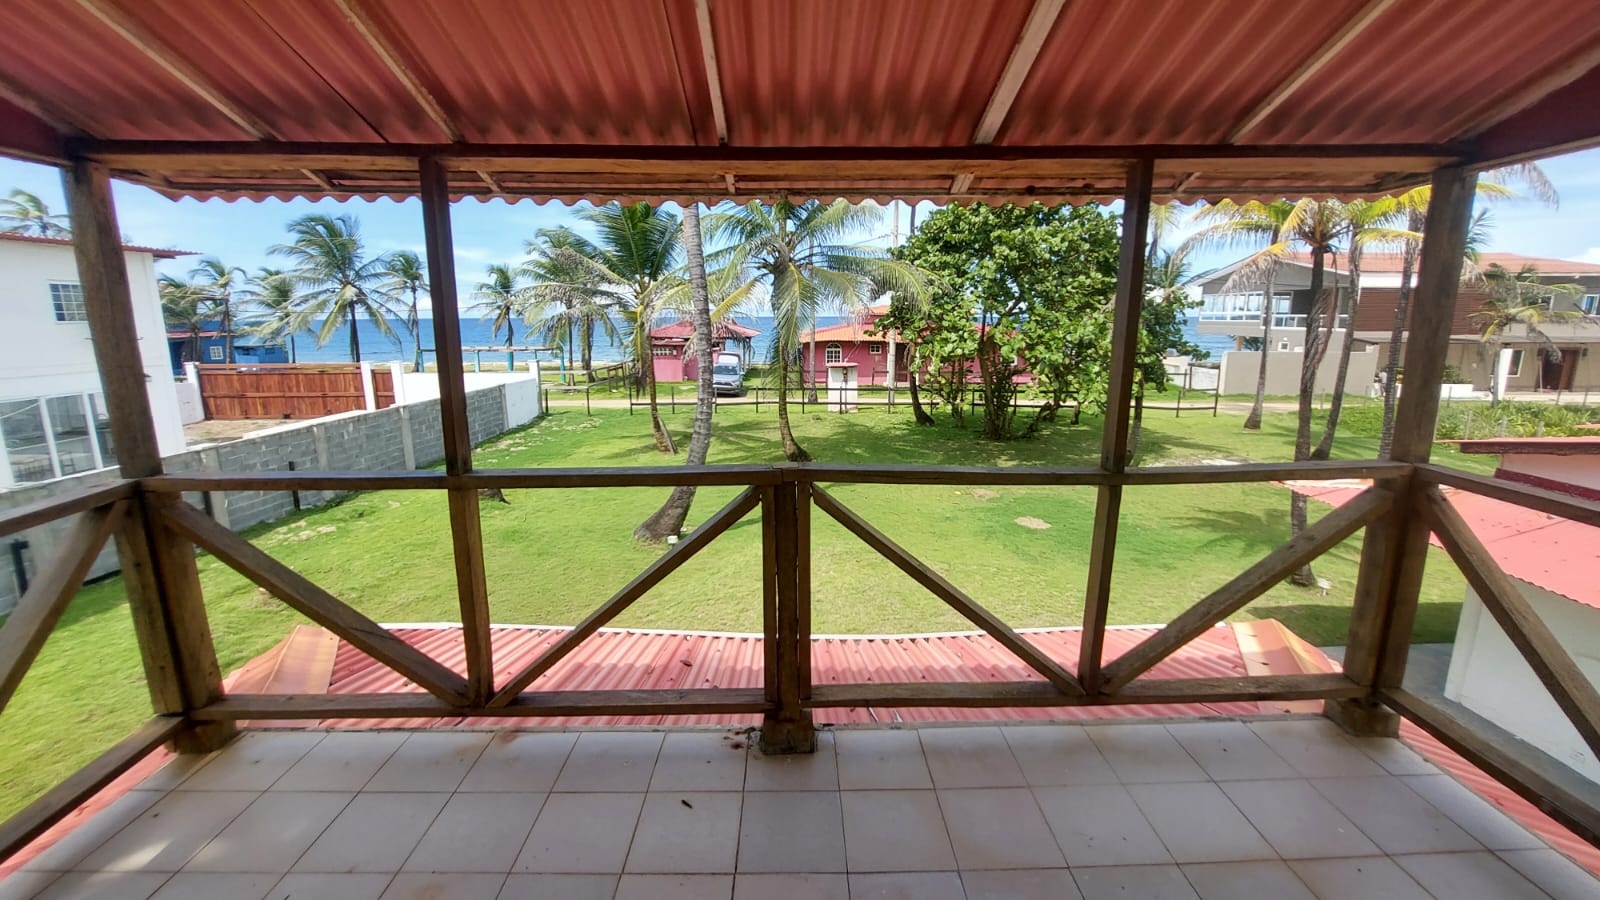 Charming 3 Bed/3 Bath Beach House for Sale in Palenque, Santa Isabel - $175,000